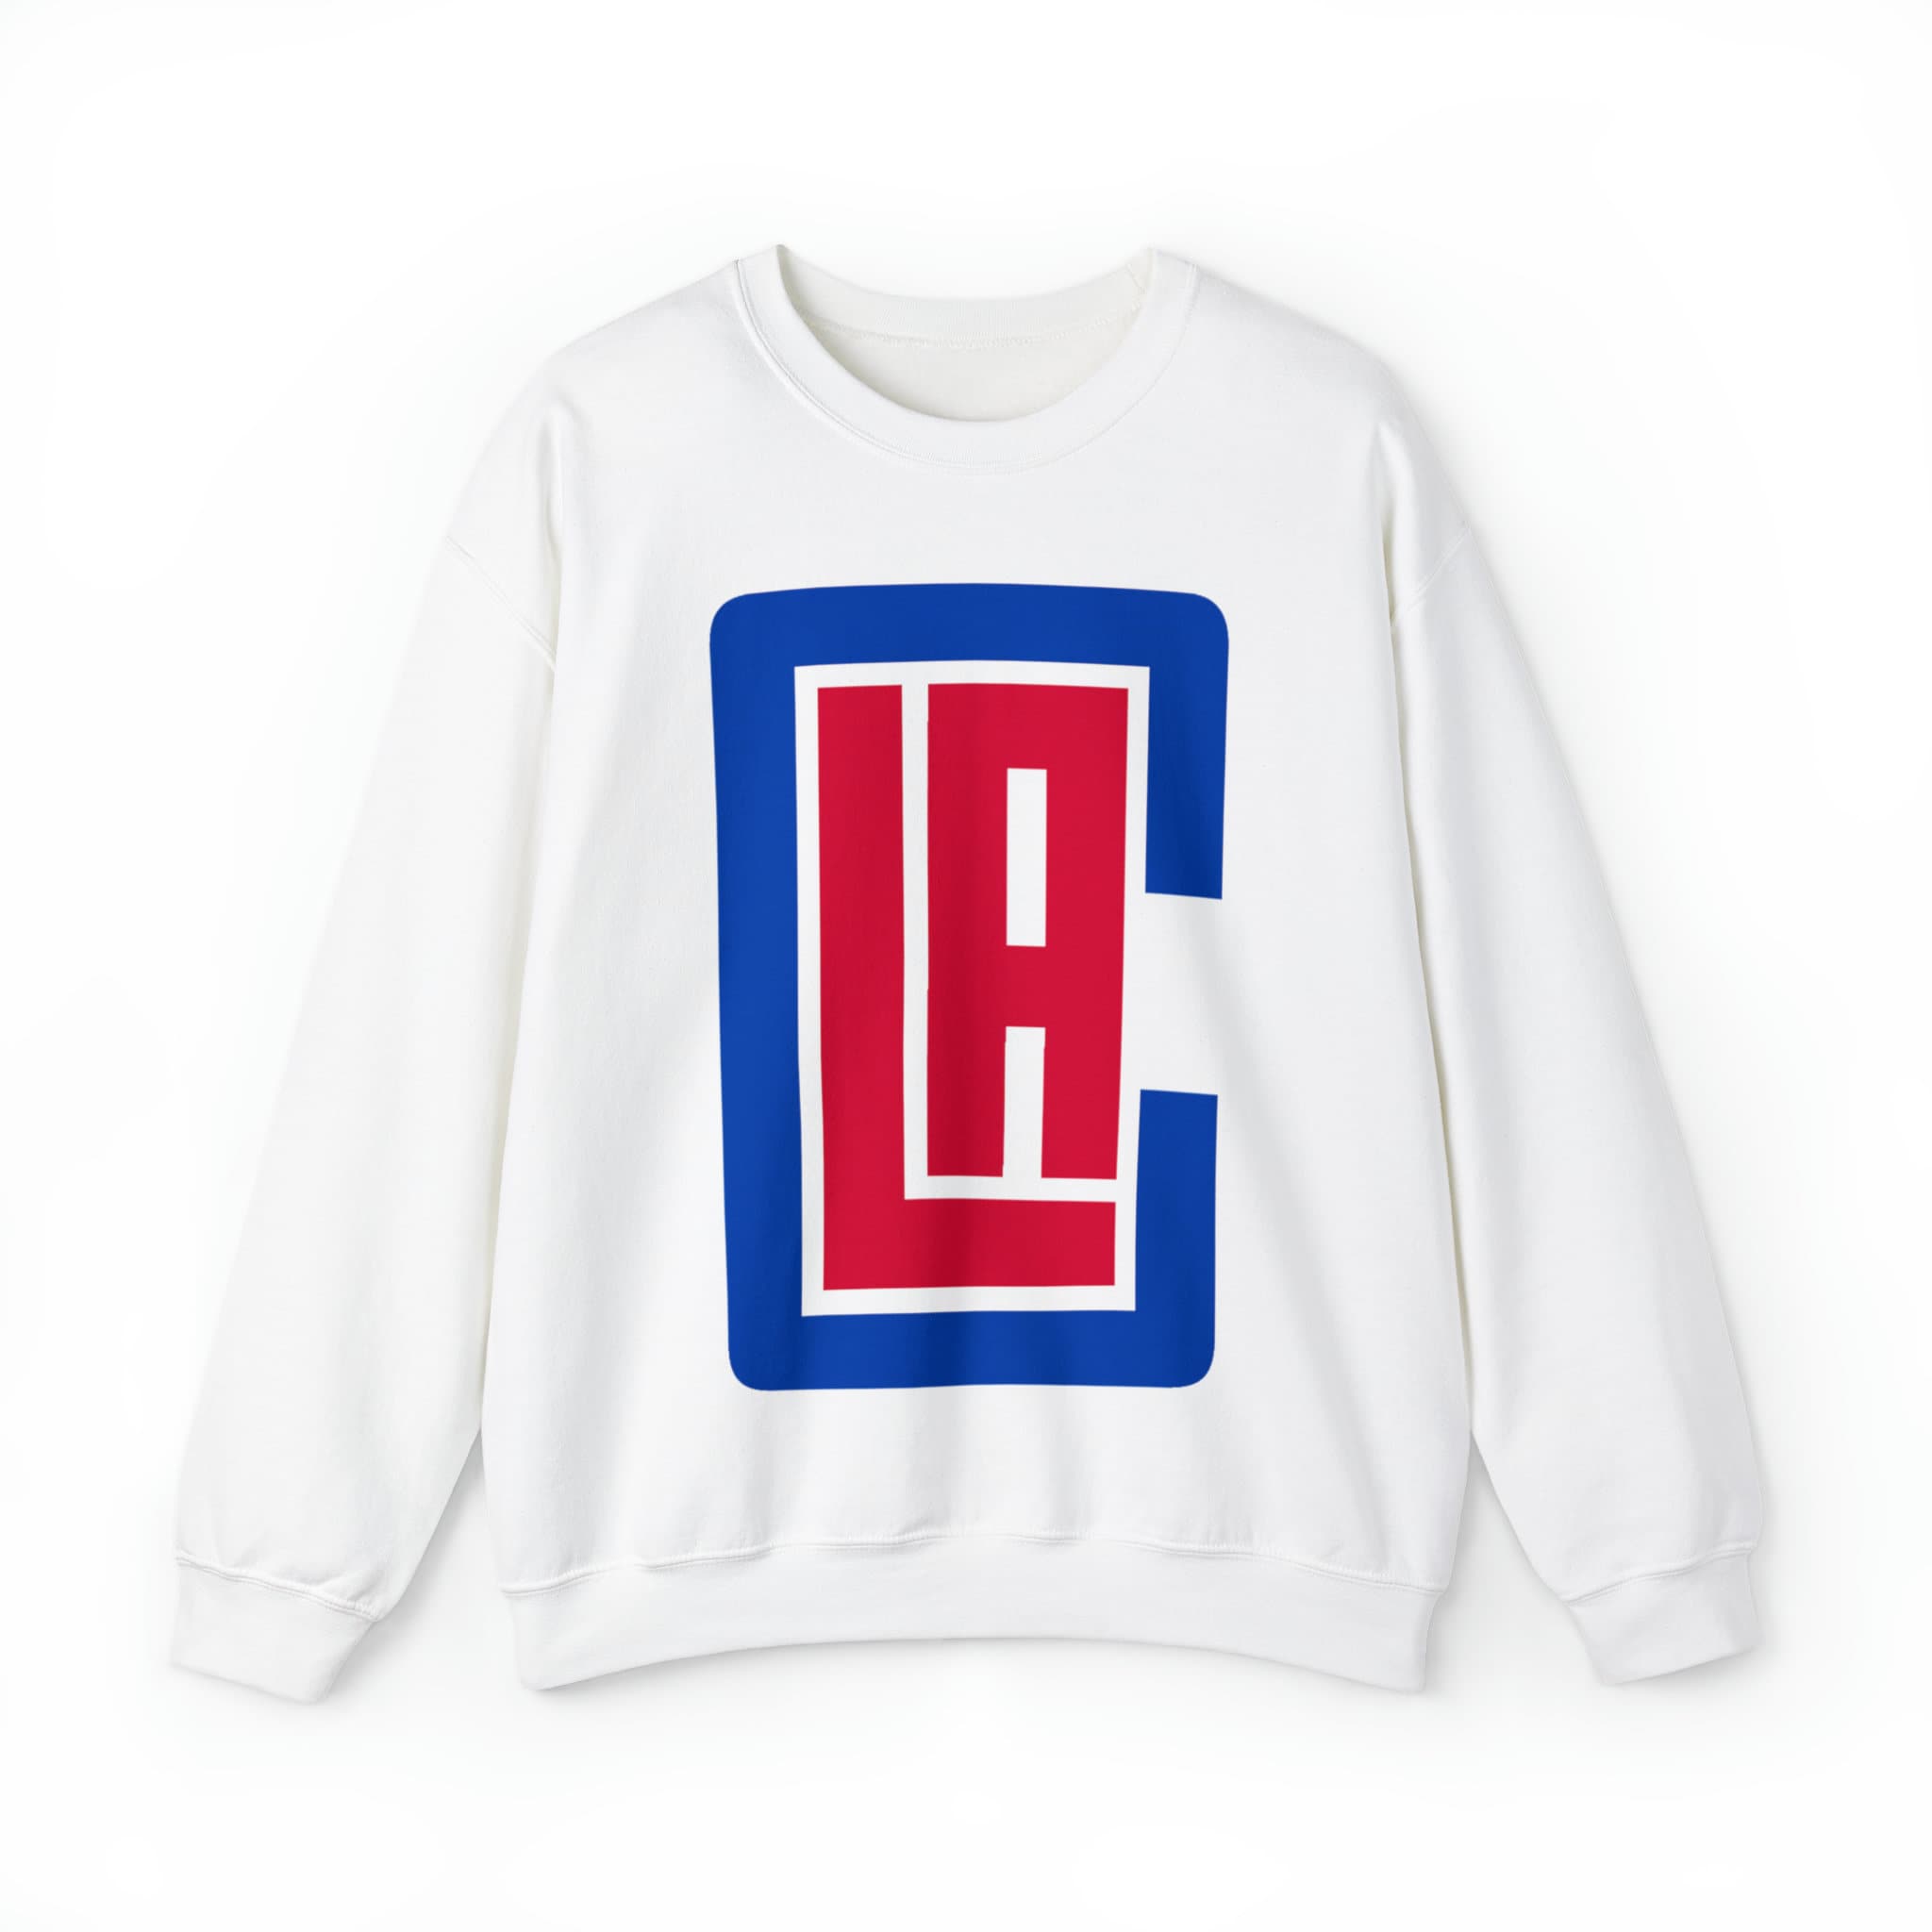 Lab Collection La Clippers La Clippers Basketball Vintage Black Tonal Hooded Sweatshirt